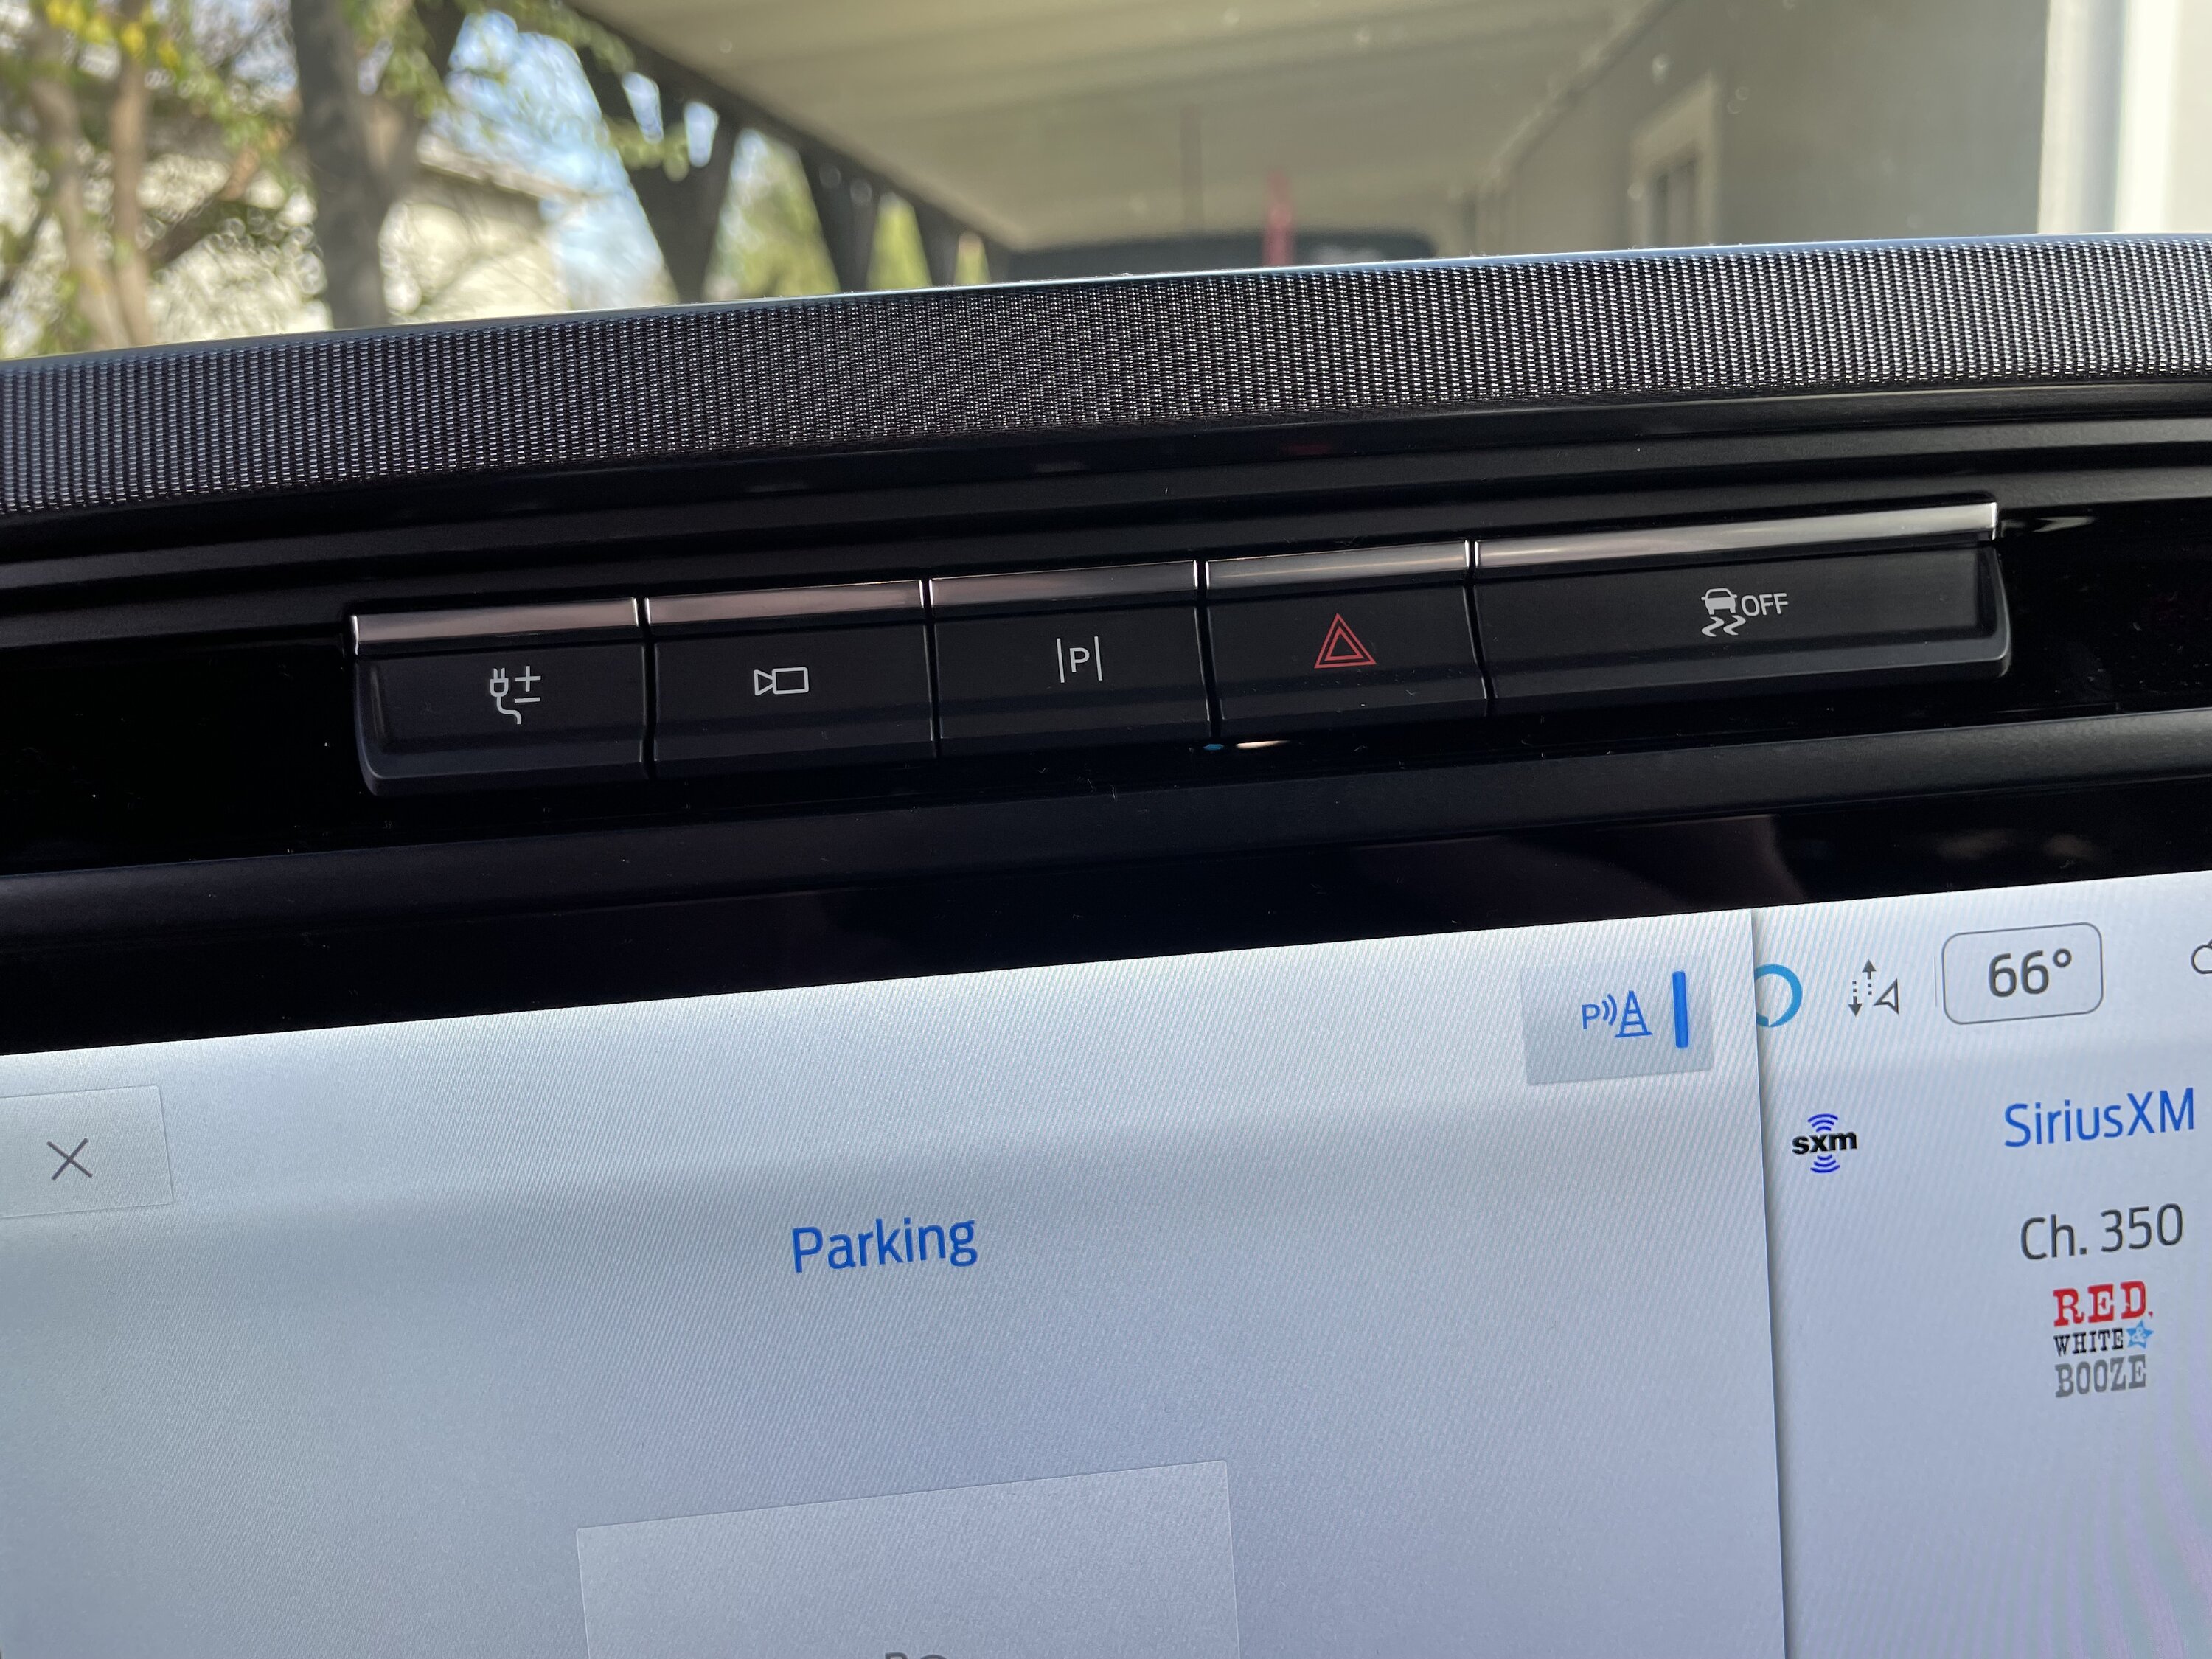 Ford F-150 Can Active Park Assist 2.0 be installed when parts are available? Photo Jan 27 2023, 12 46 59 PM